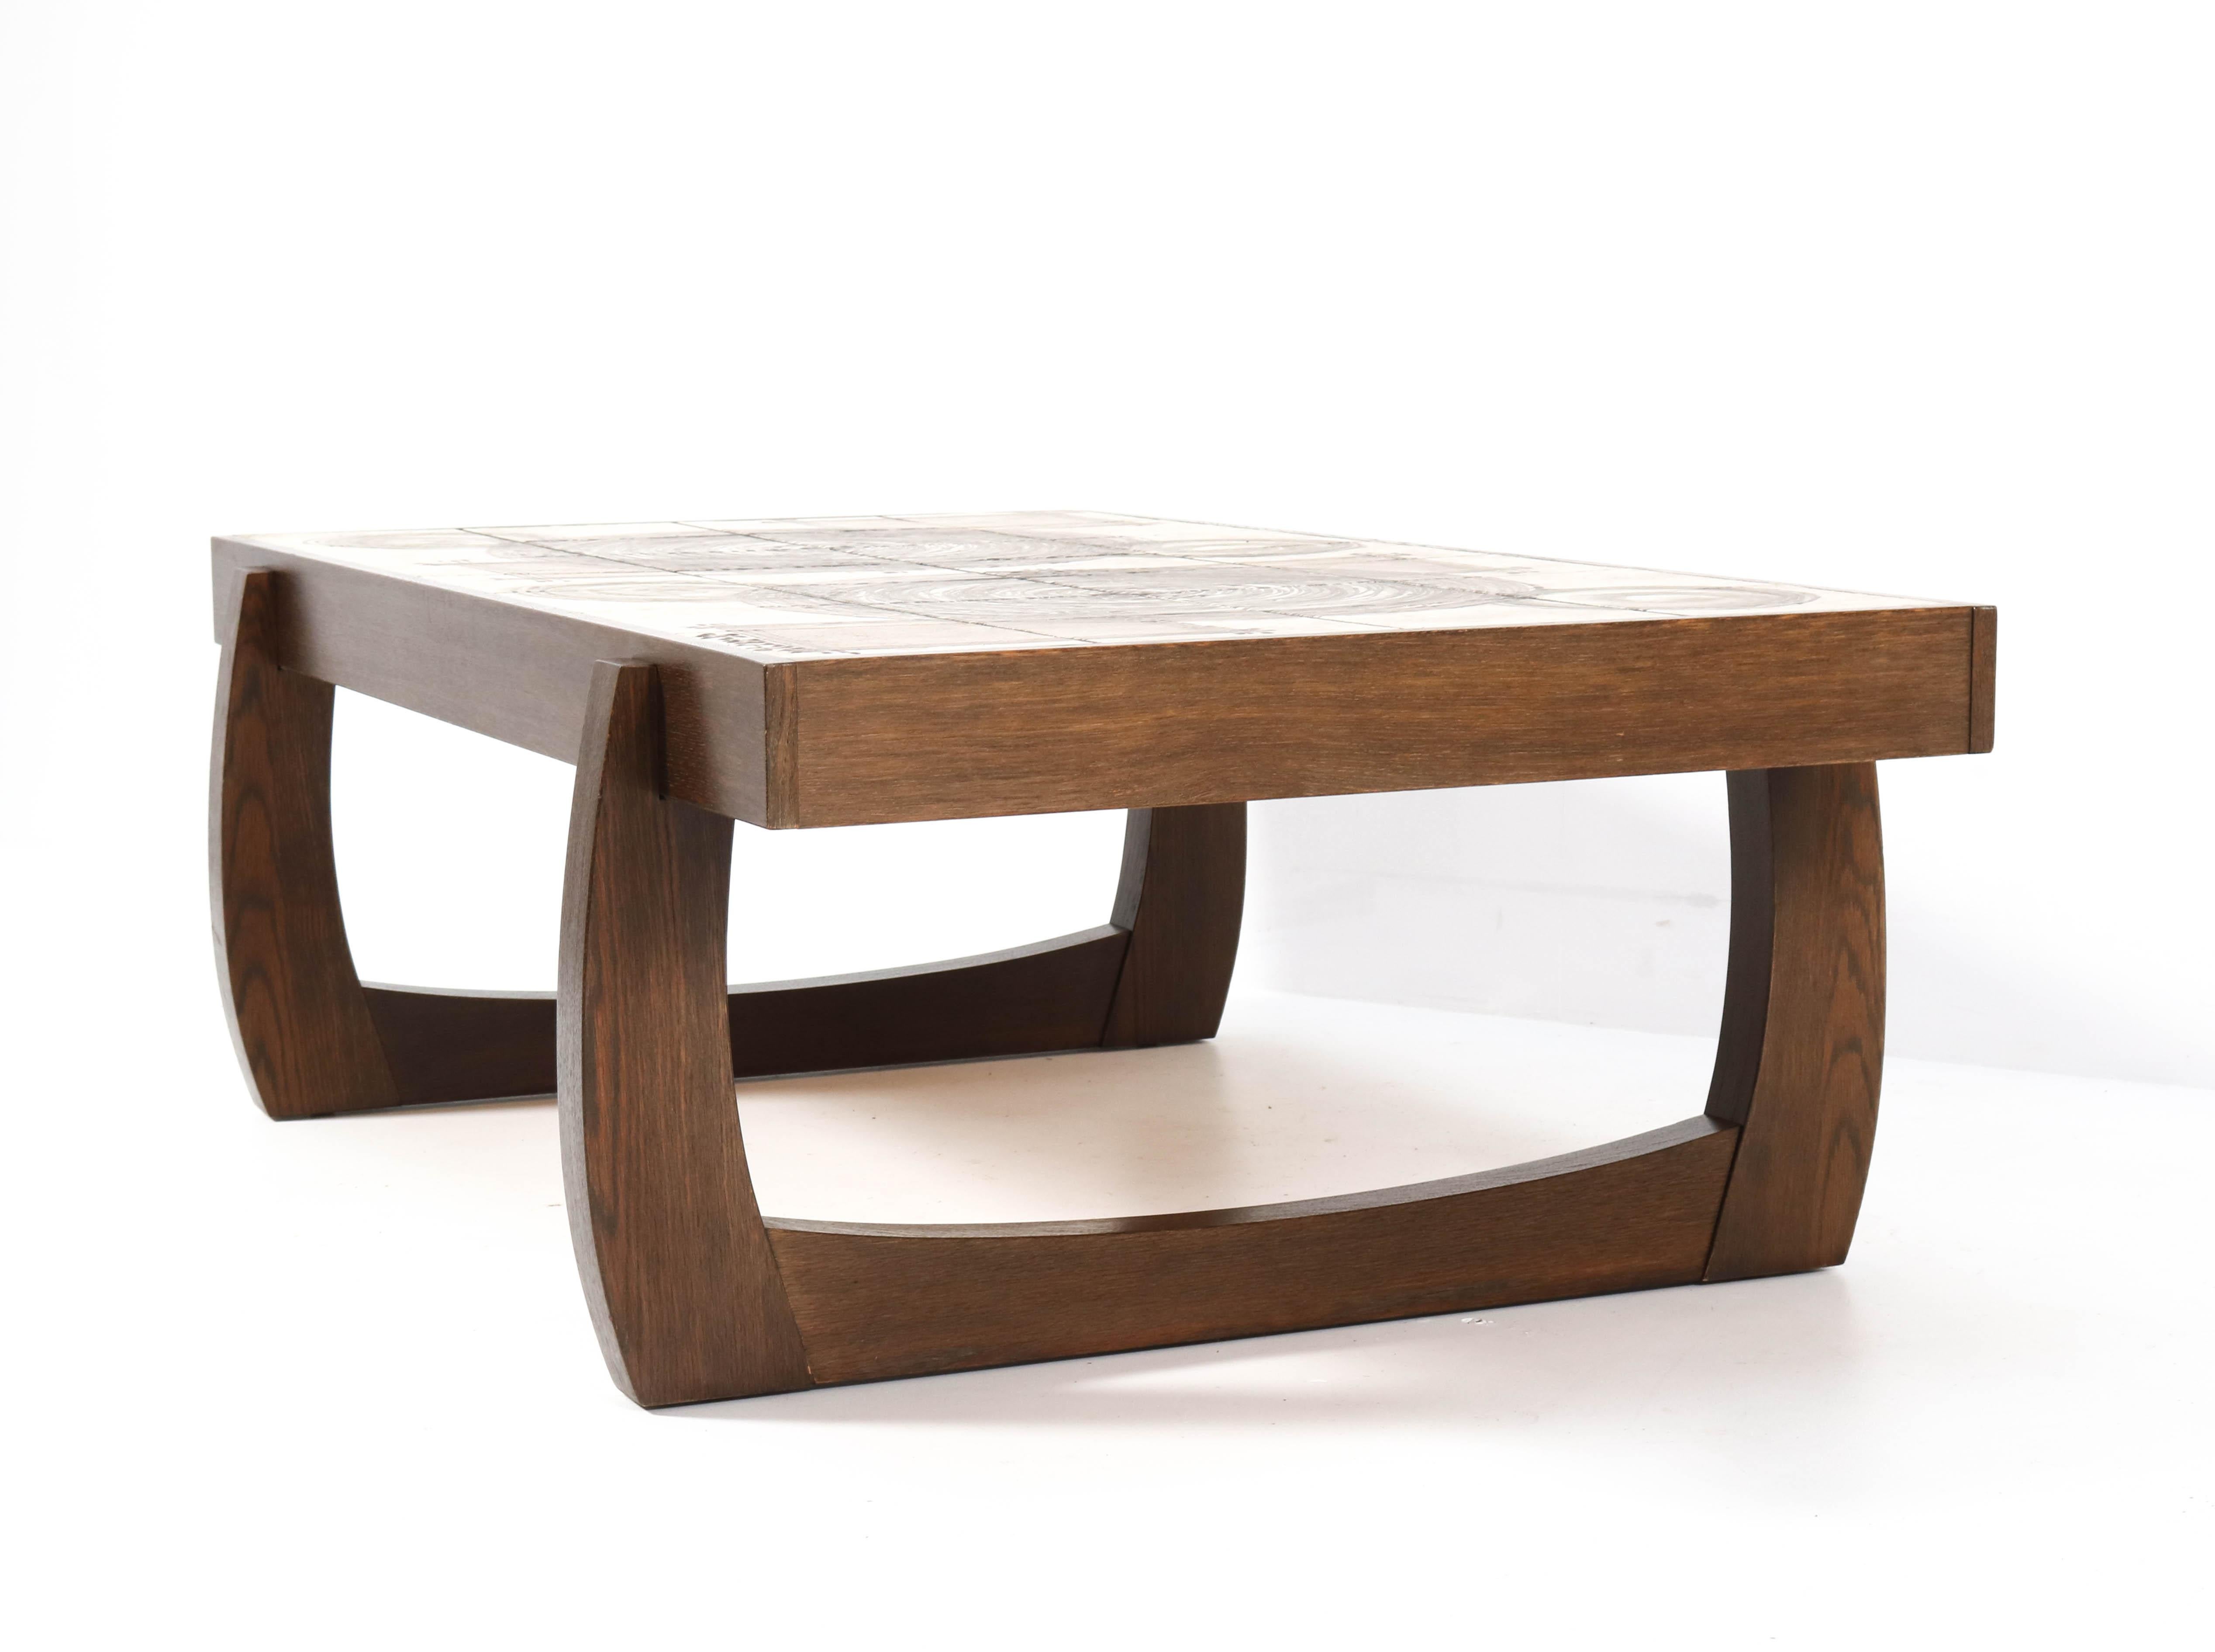 Late 20th Century Wenge Brutalist Coffee Table with Tiles by OX Art for Trioh, 1976